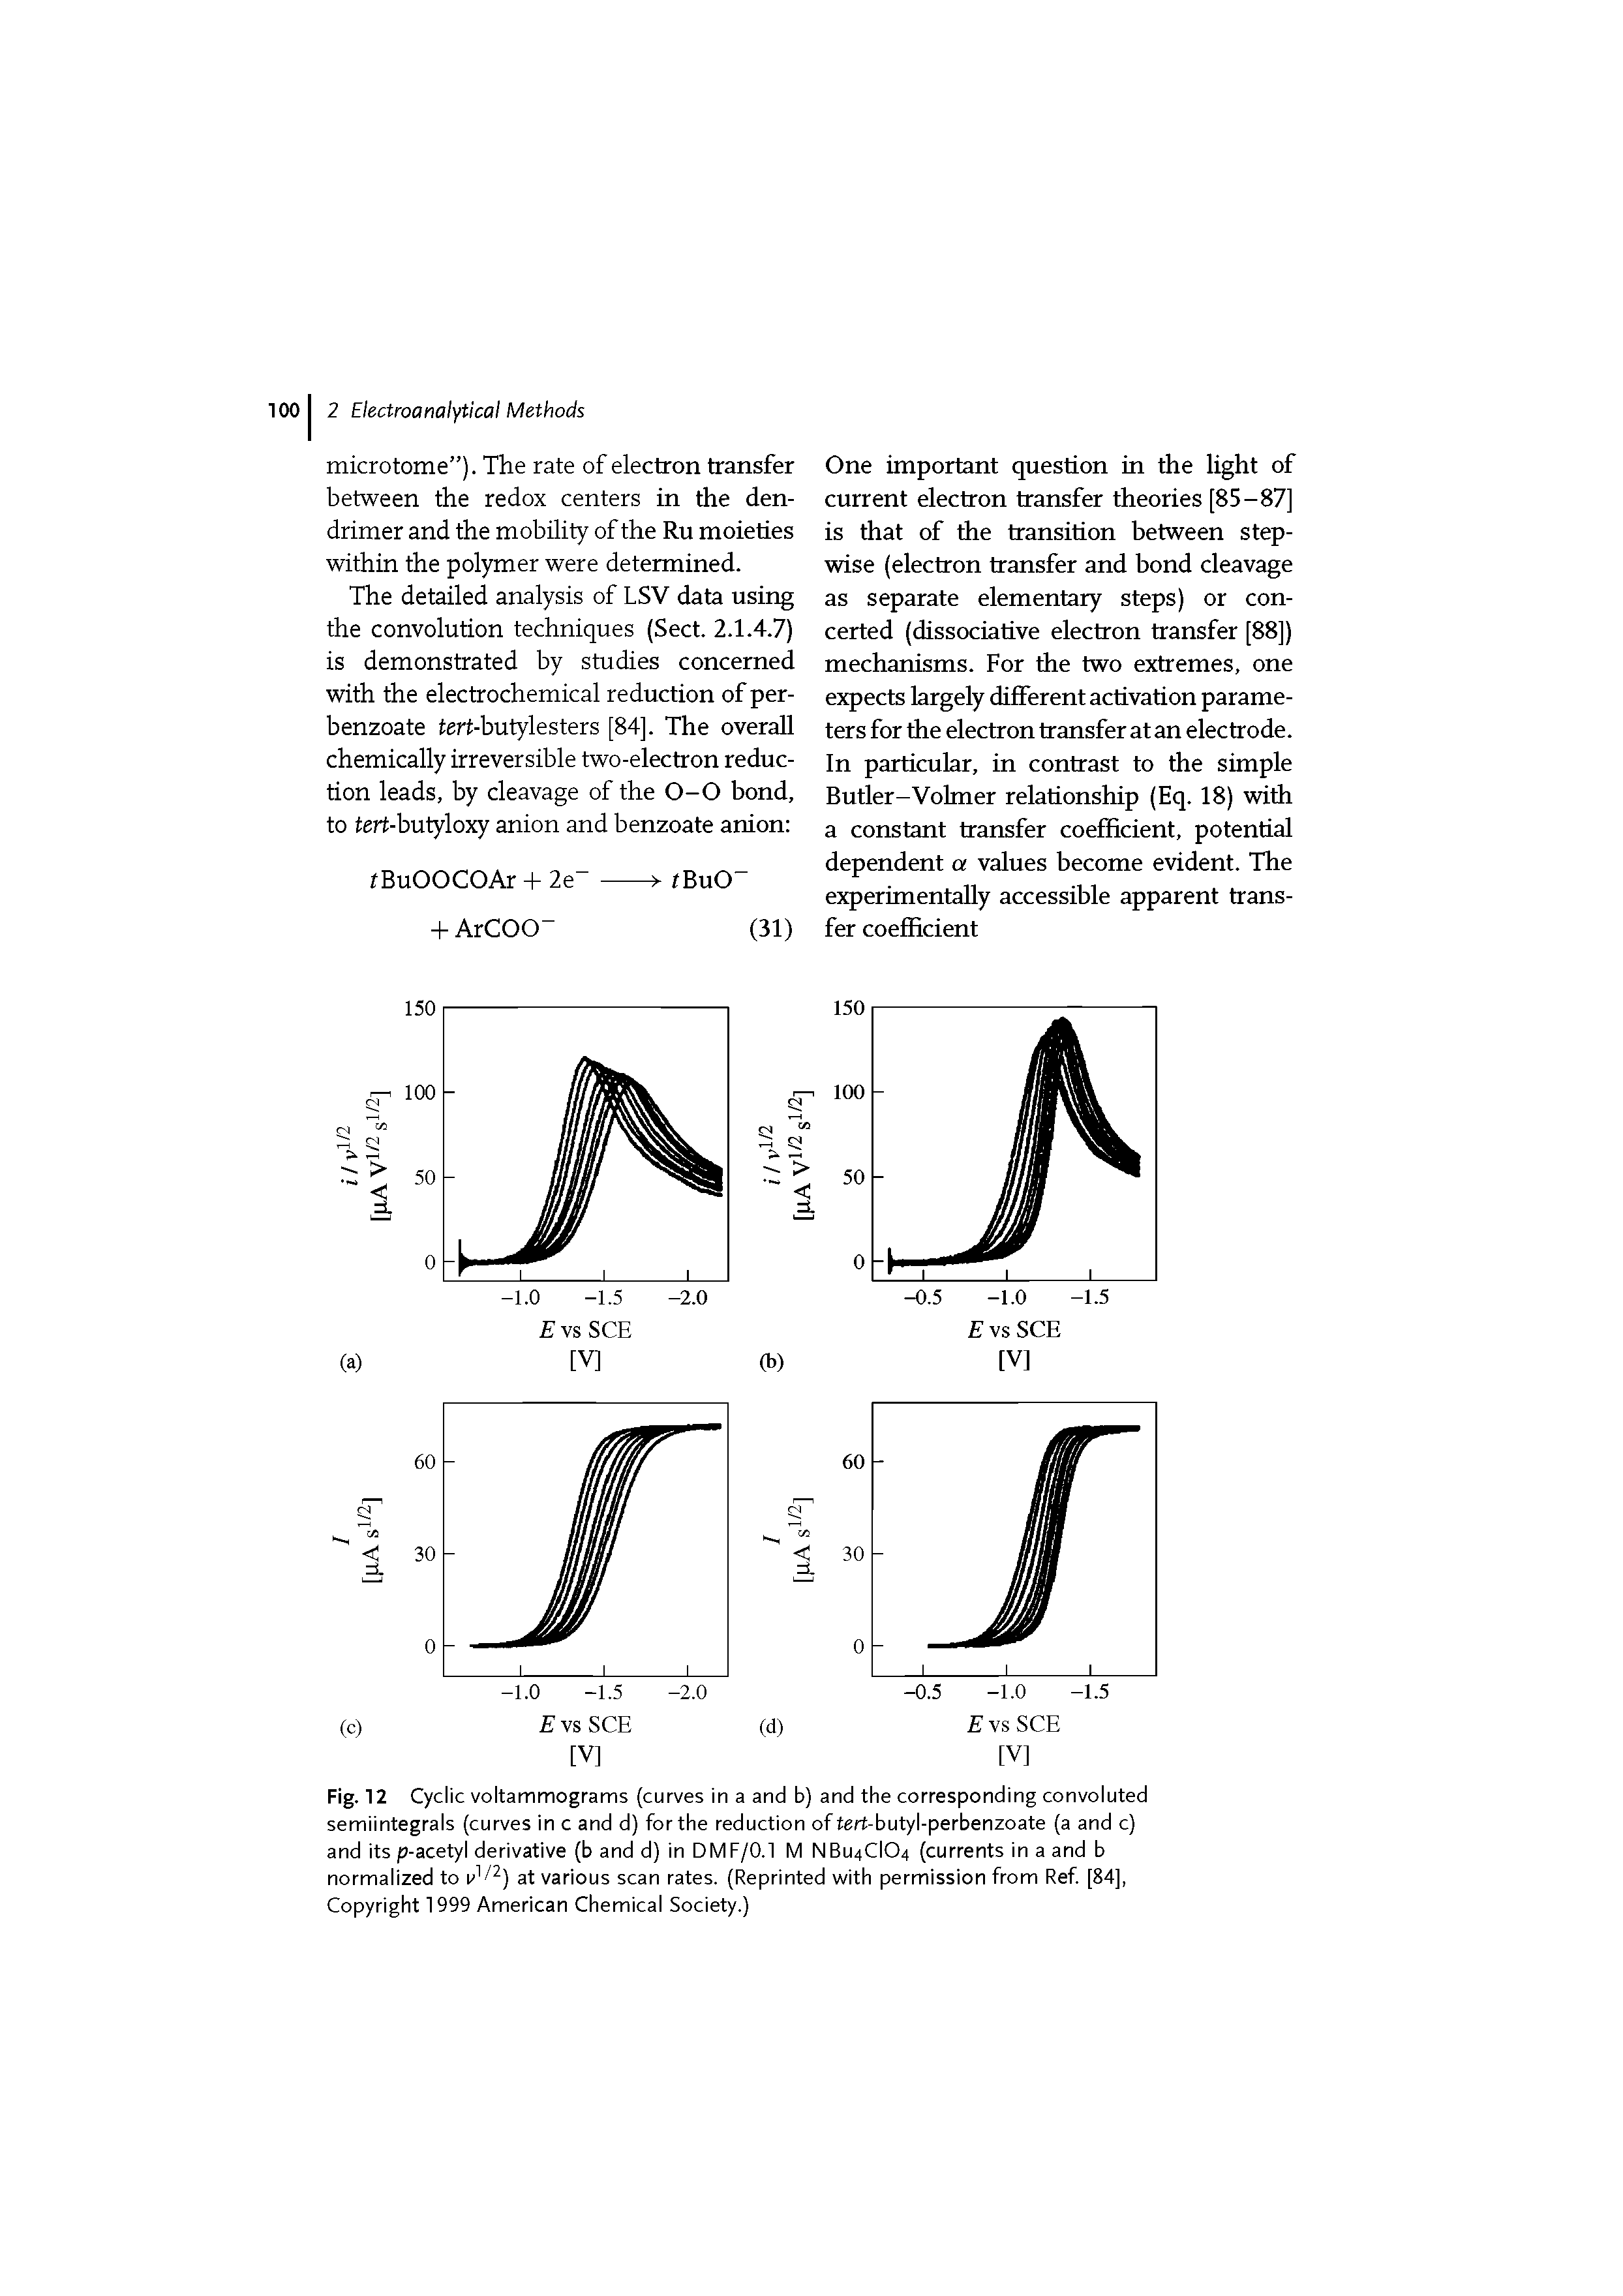 Fig. 12 Cyclic voltammograms (curves in a and b) and the corresponding convoluted semiintegrals (curves In c and d) for the reduction of tert-butyl-perbenzoate (a and c) and its p-acetyl derivative (b and d) in DMF/0.1 M NBU4CIO4 (currents in a and b normalized to at various scan rates. (Reprinted with permission from Ref [84], Copyright 1999 American Chemical Society.)...